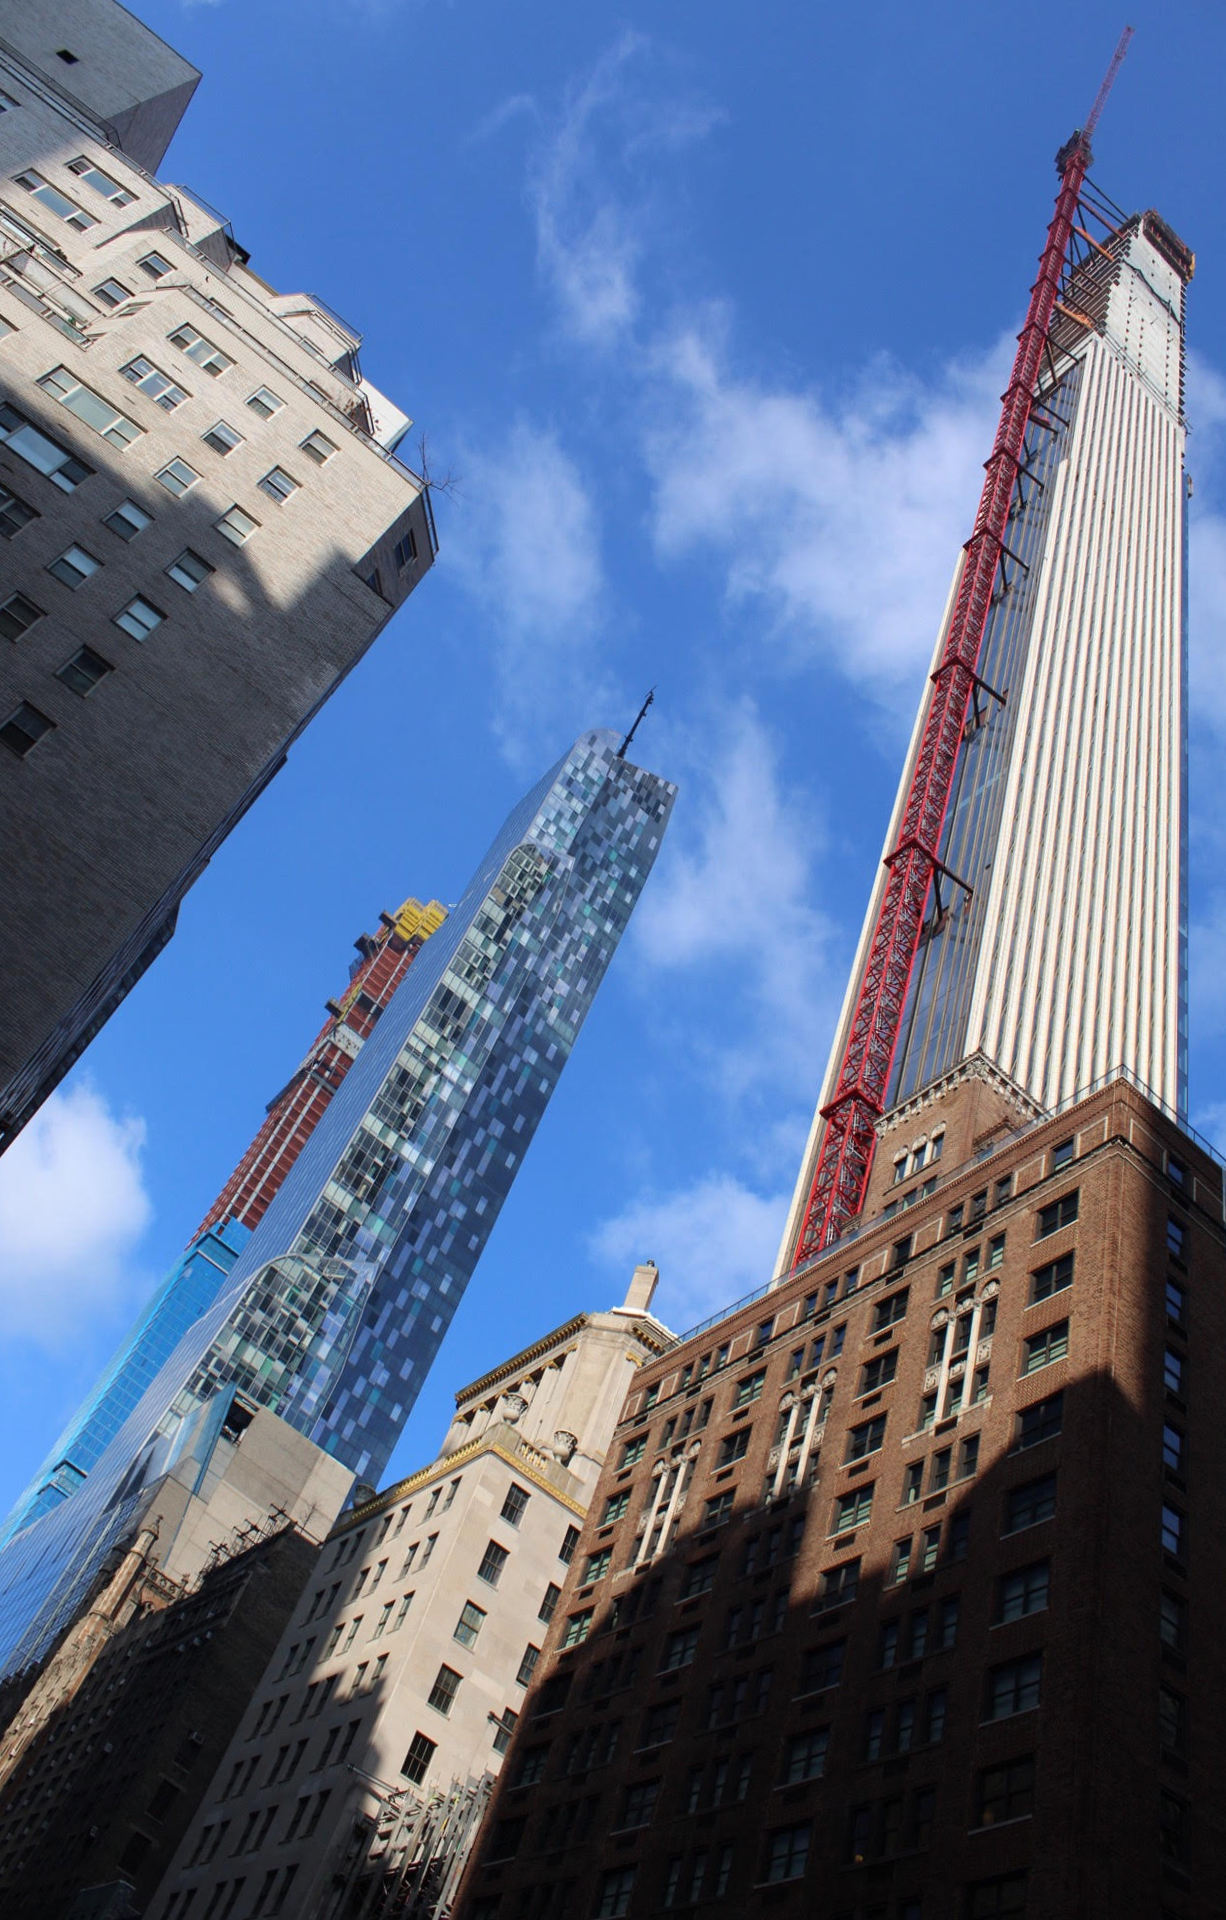 An Architecture Lover's Guide to Manhattan's 57th Street